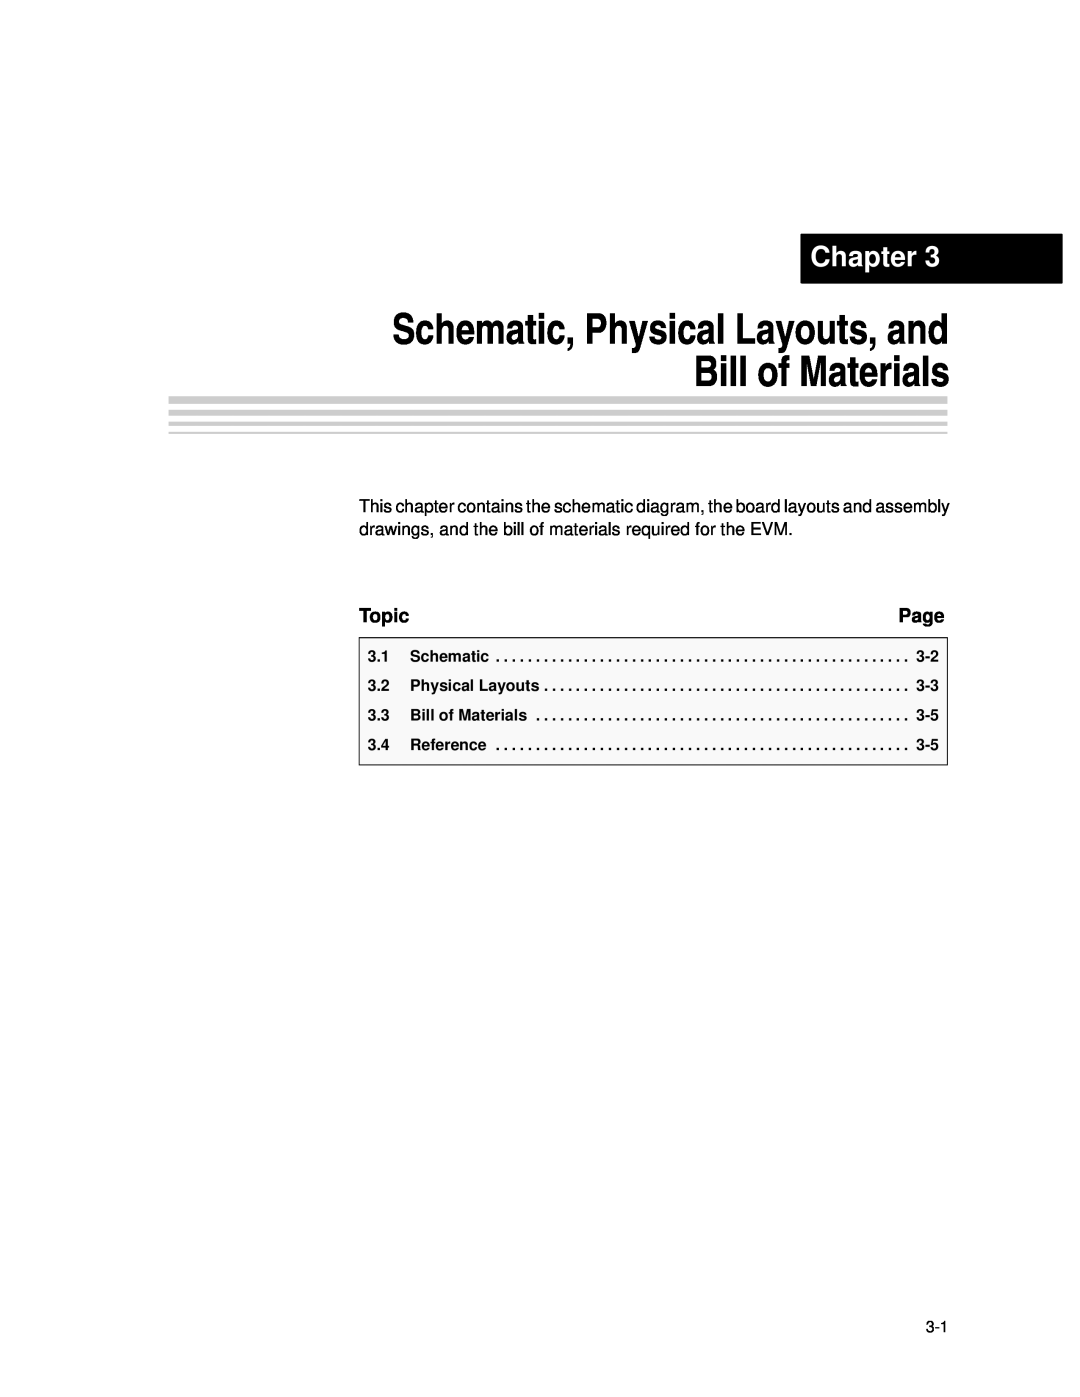 Texas Instruments bq24010/2 manual Schematic, Physical Layouts, and Bill of Materials, Chapter, Page, Topic, Reference 